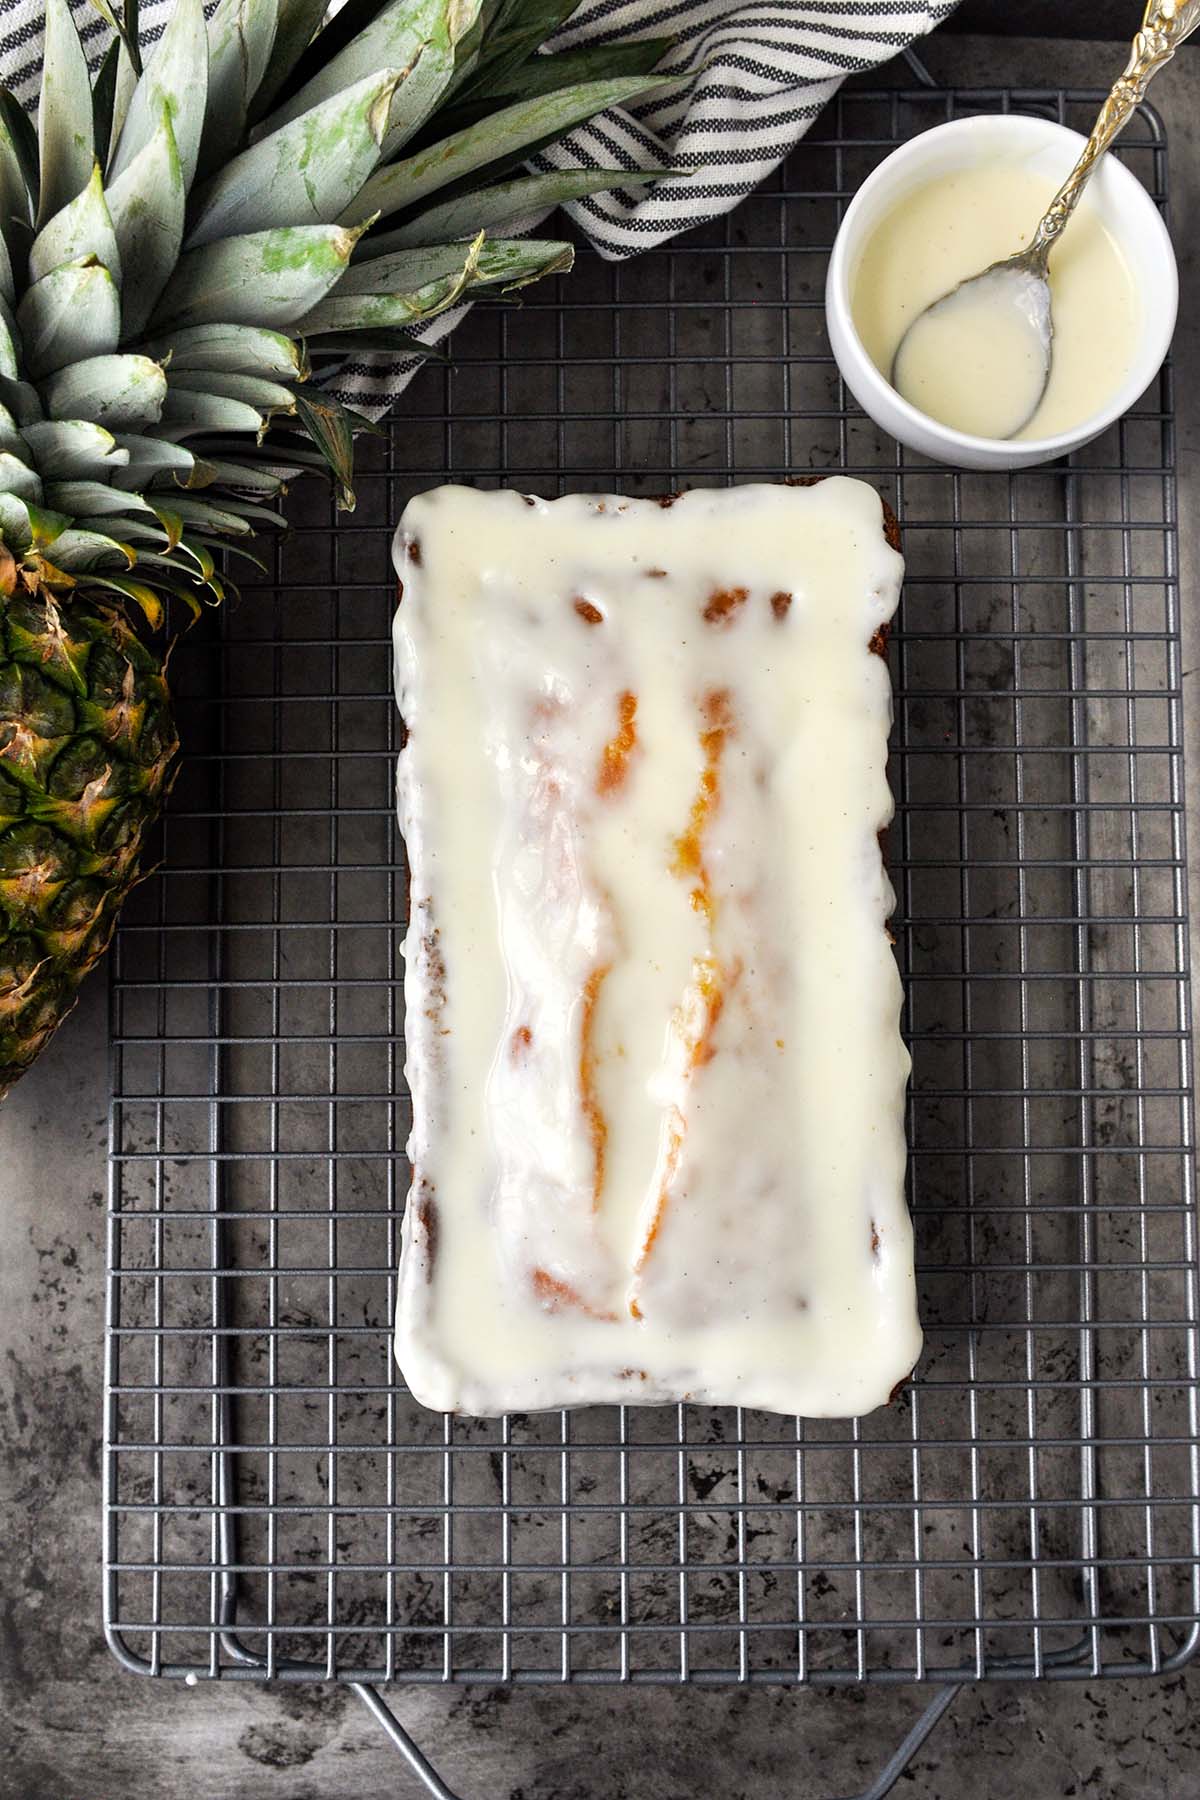 An above view of a glazed pineapple pound cake on a cooking rack with a pineapple.